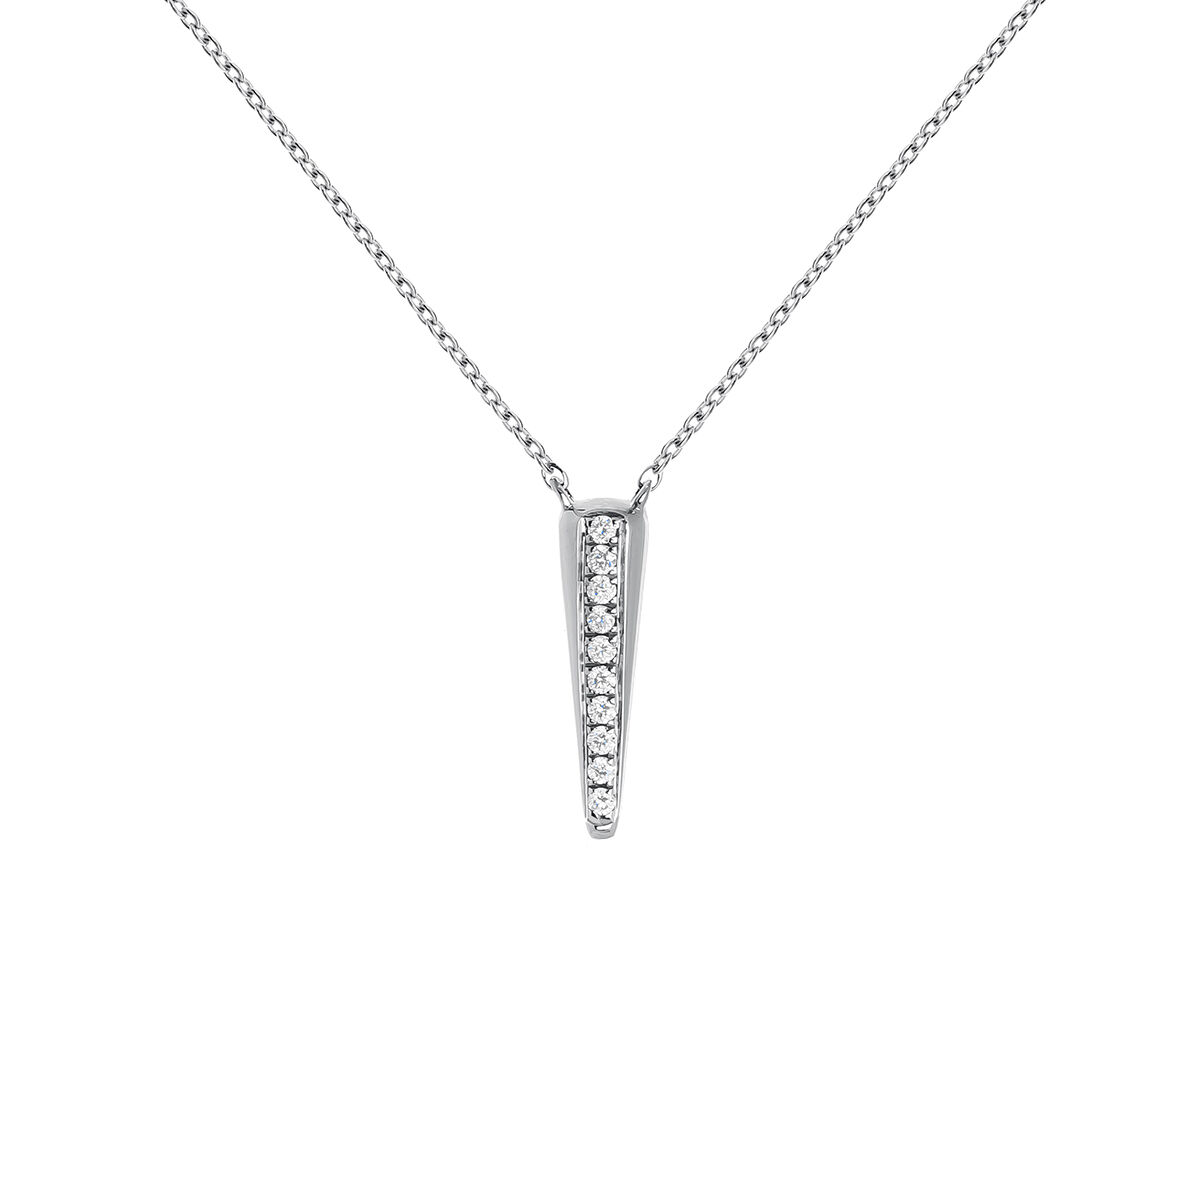 White gold spike and diamond necklace 0.04 ct , J03884-01, mainproduct